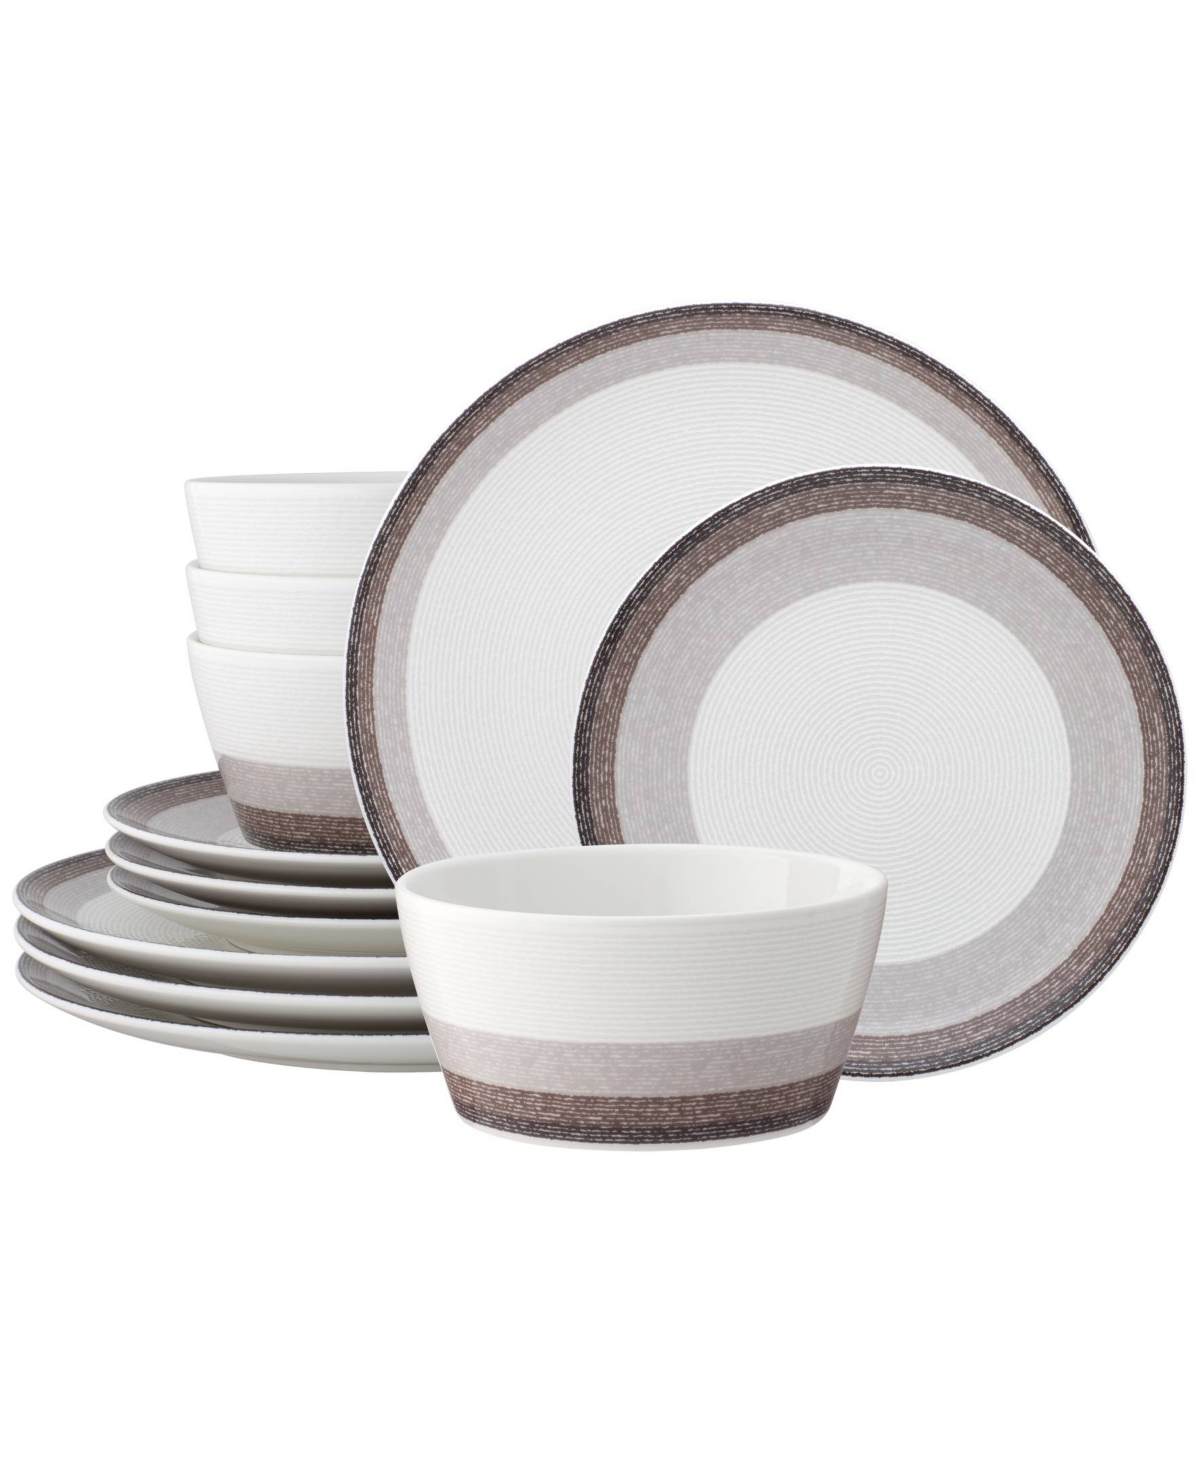 Colorscapes Canyon Layers 12 Piece Coupe Dinnerware Set - Canyon